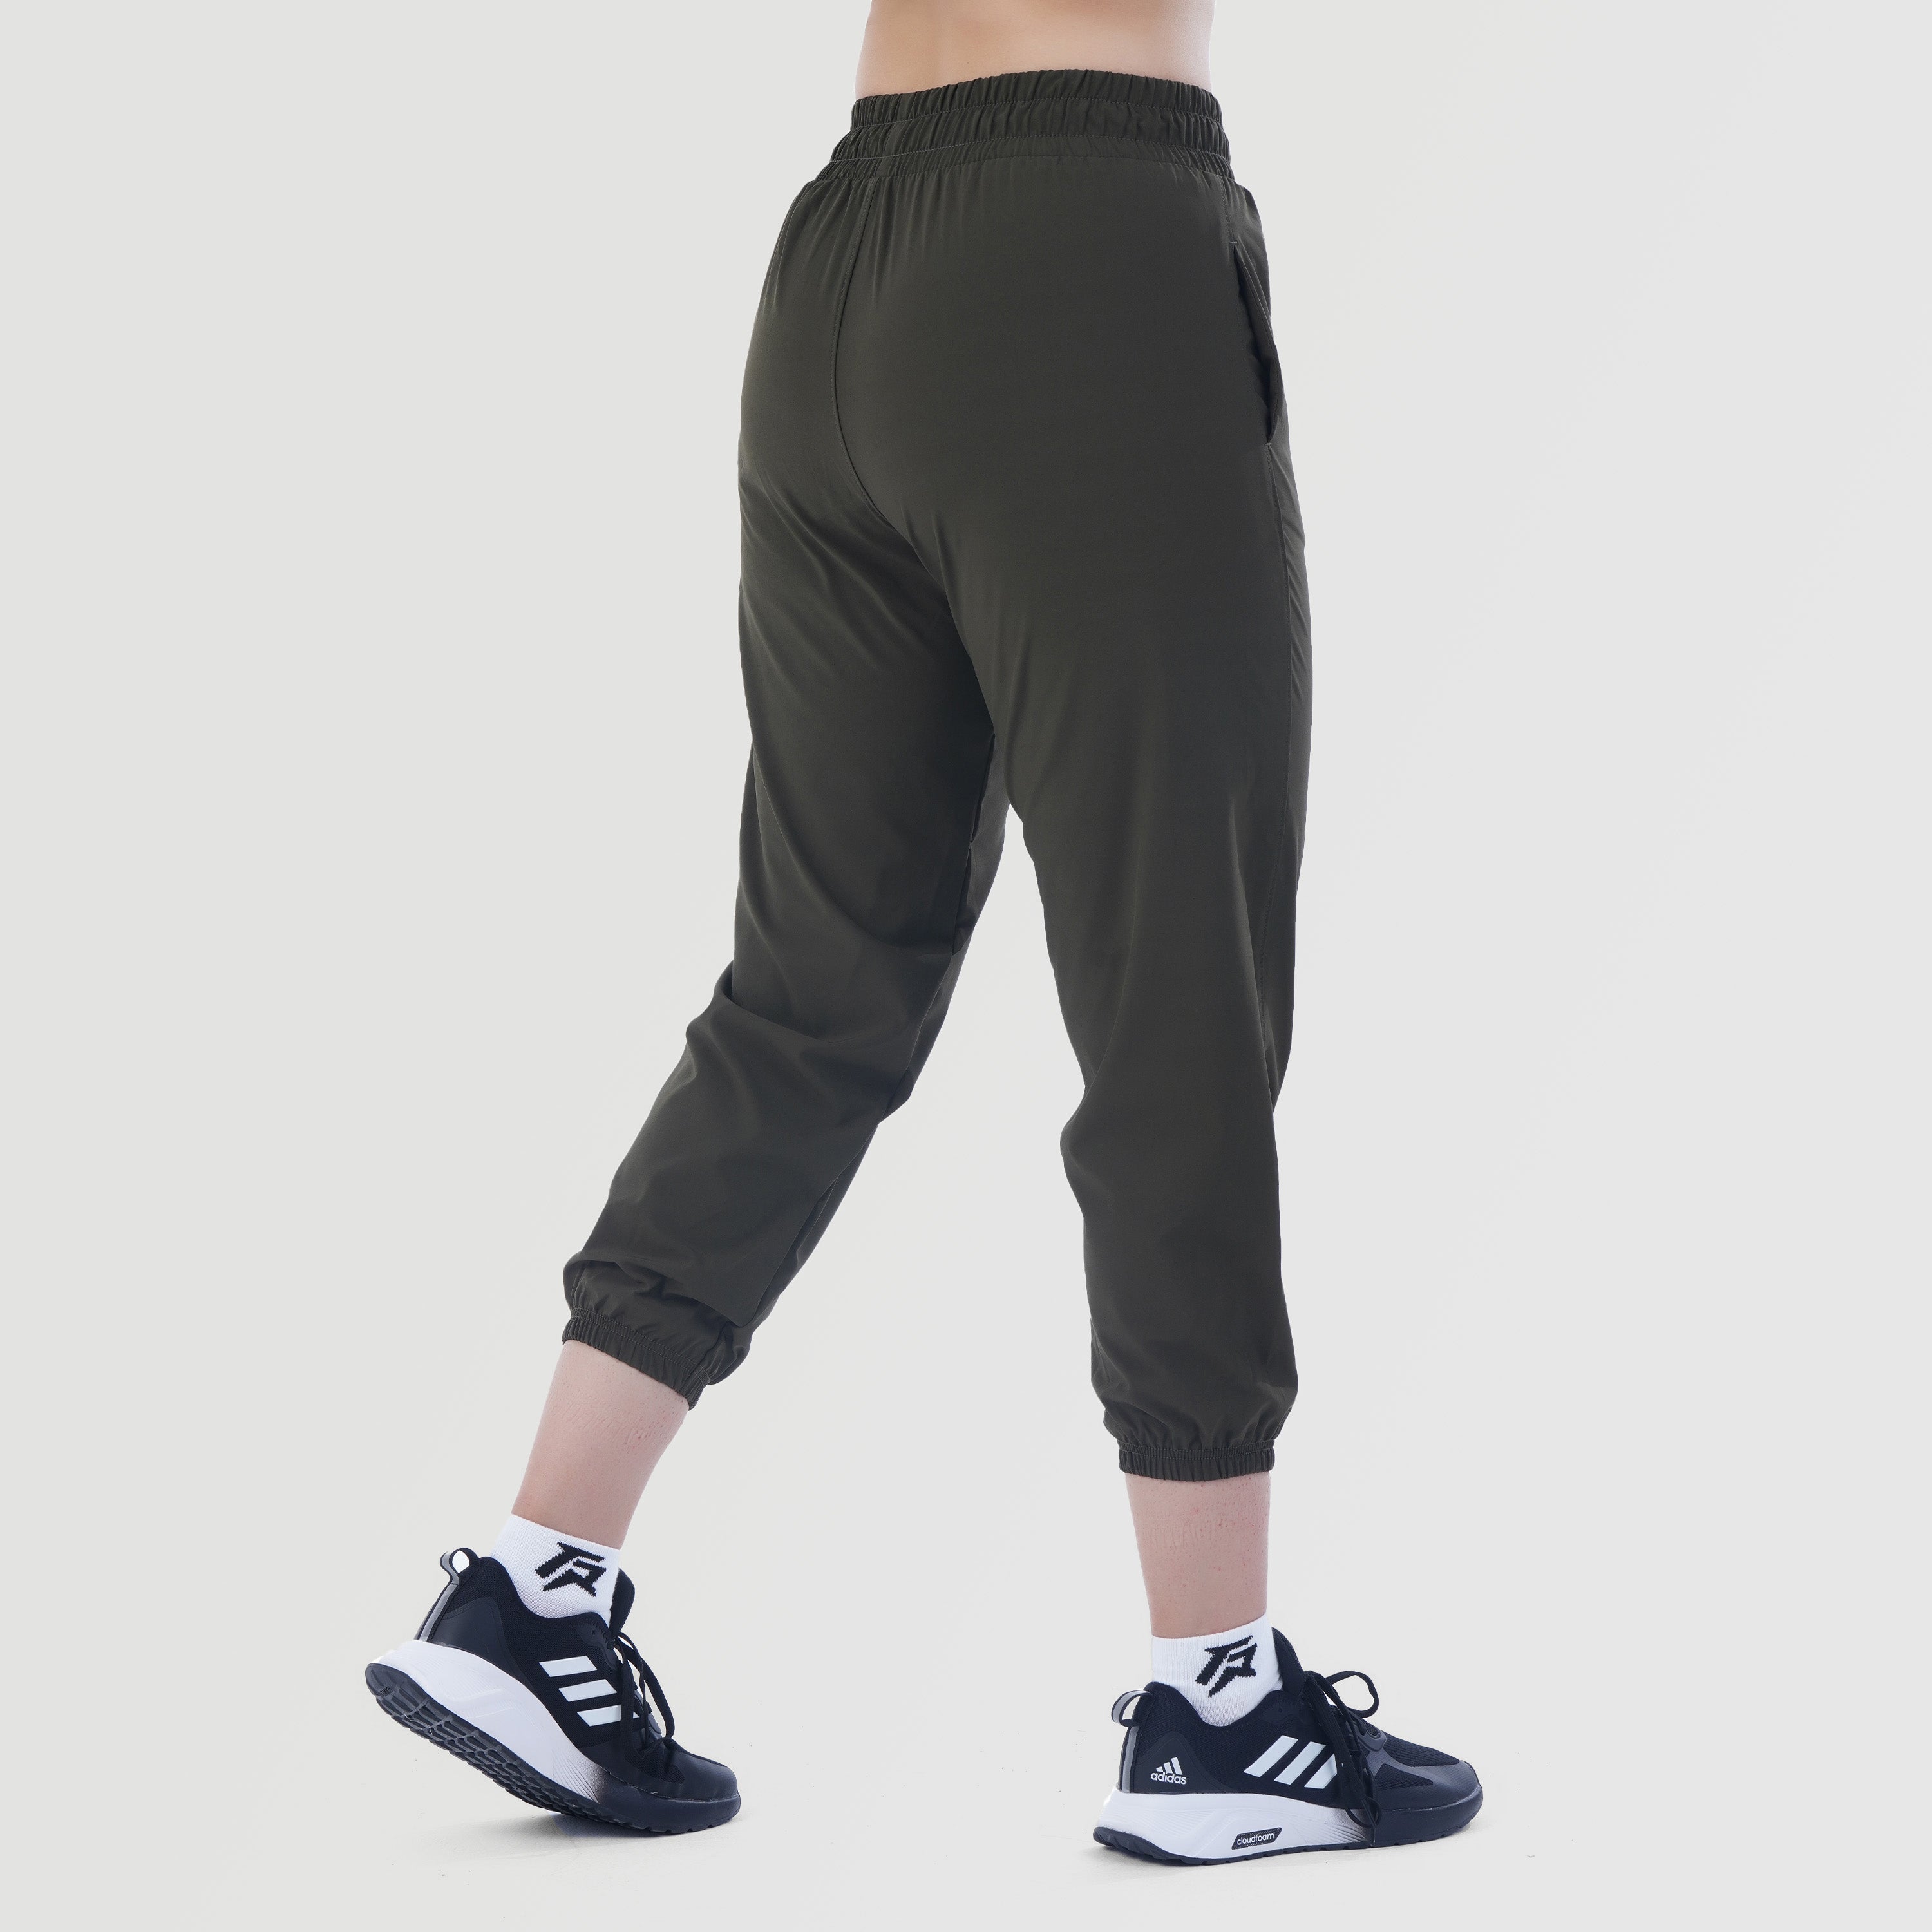 ActiveStride 7/8 Trousers (Olive)